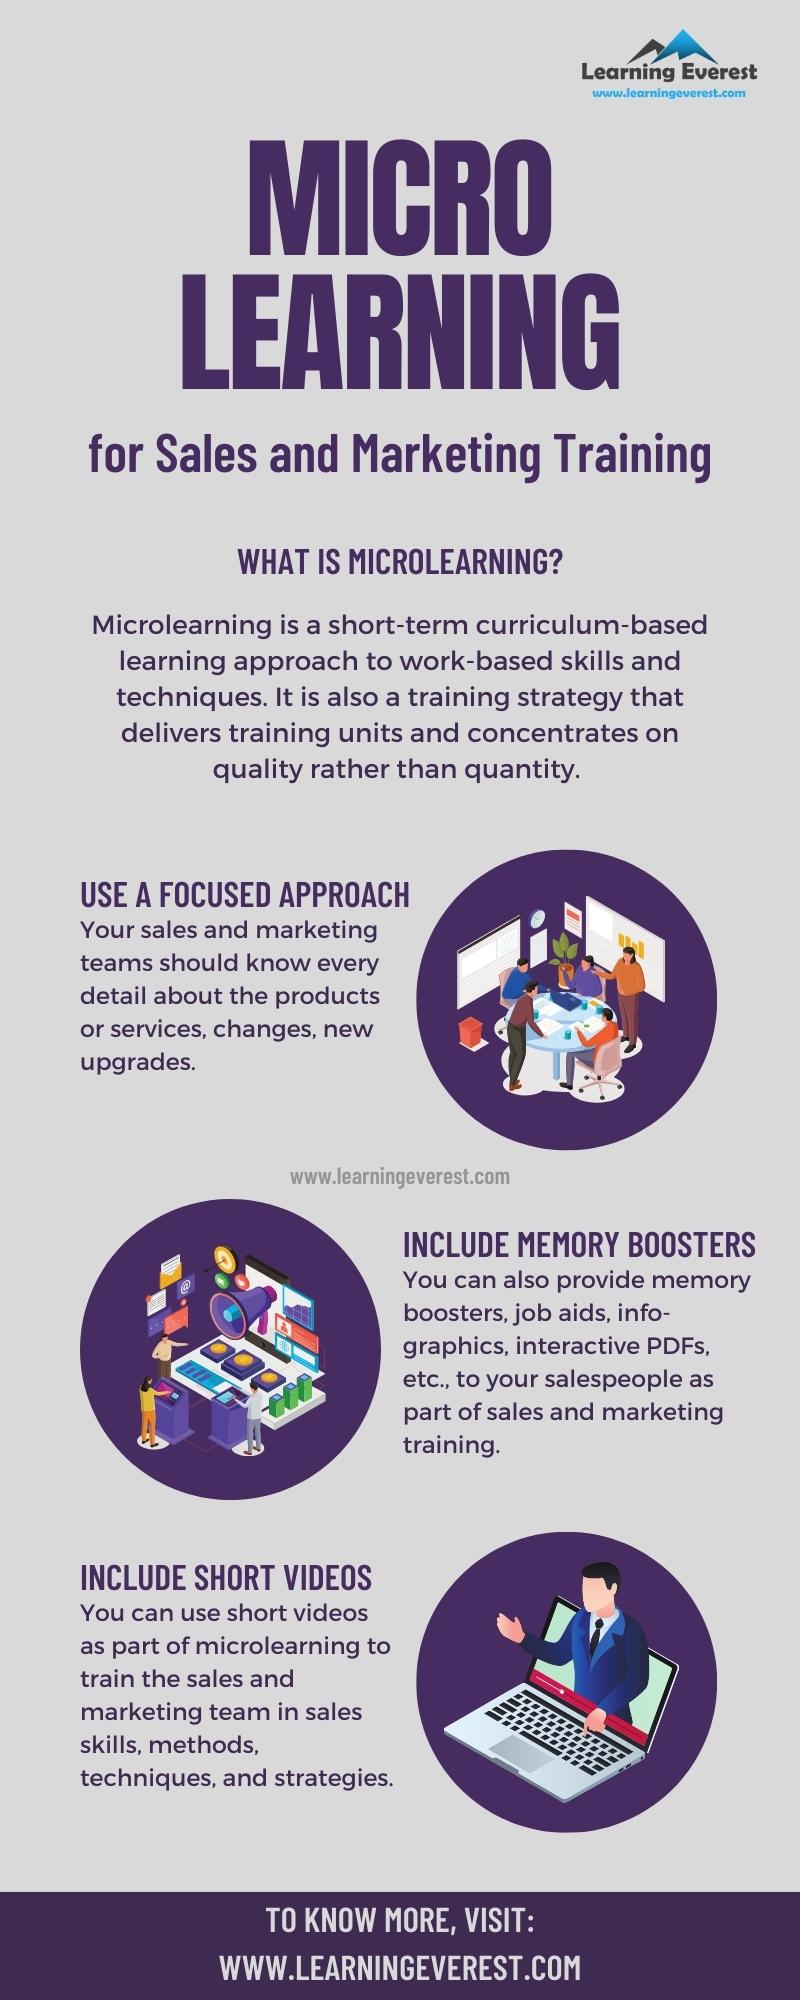 Microlearning for Sales and Marketing Training